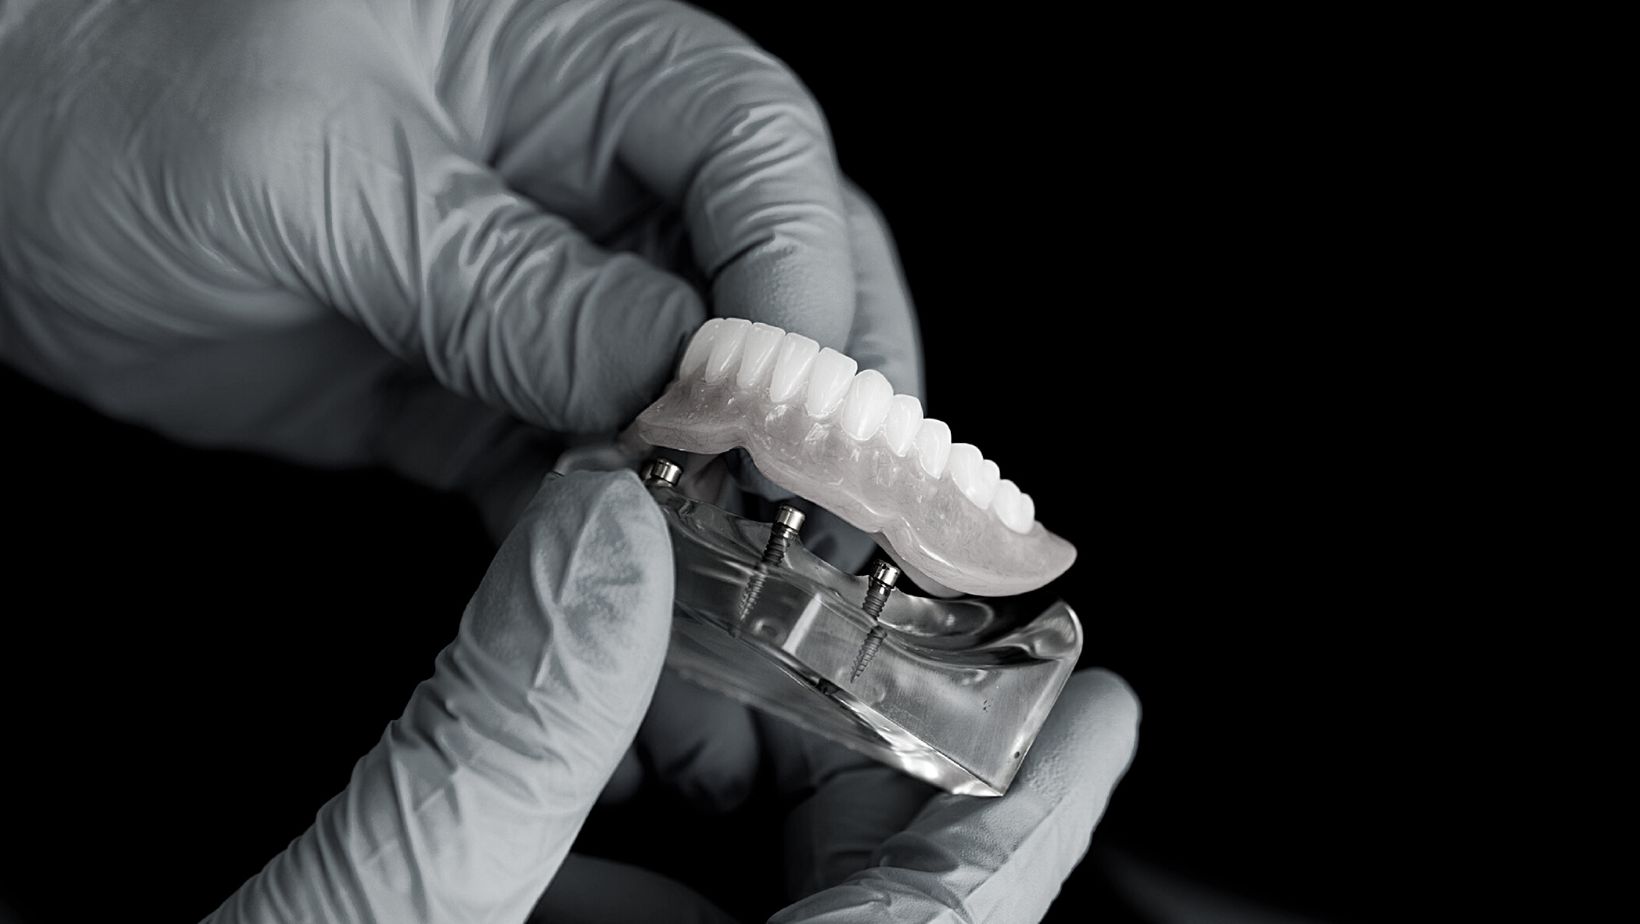 Dental Implants vs. Dentures: Costs, Advantages, and Key Differences